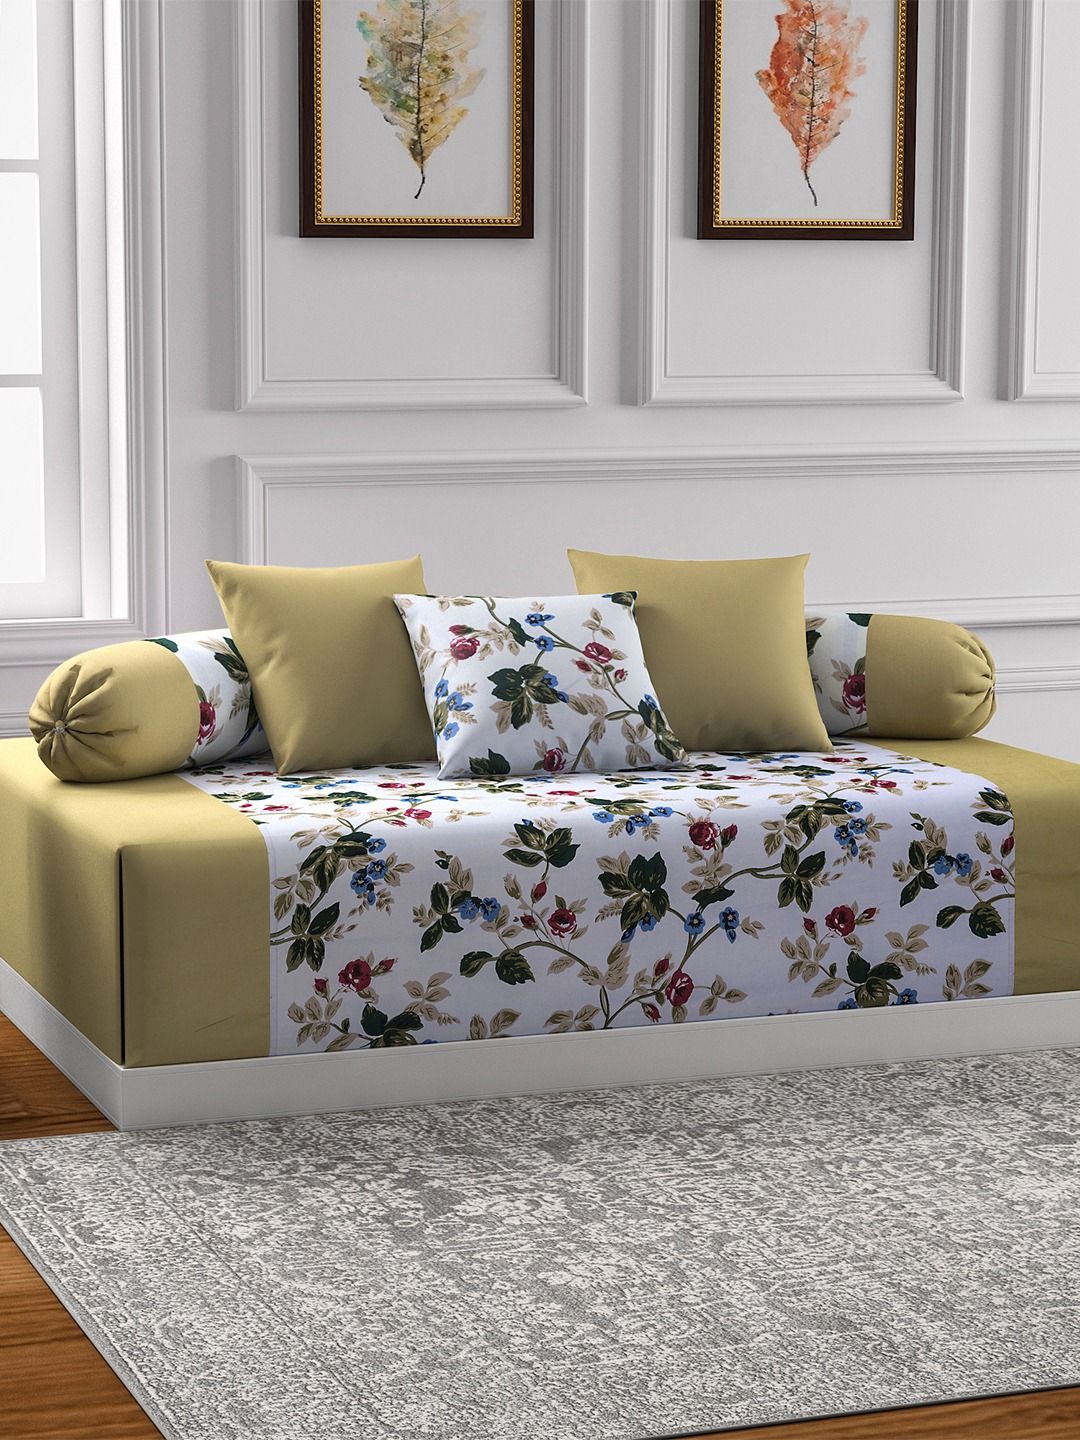 SWAYAM Green & Off-White Printed Diwan Set with Bolster & Cushion Covers Price in India